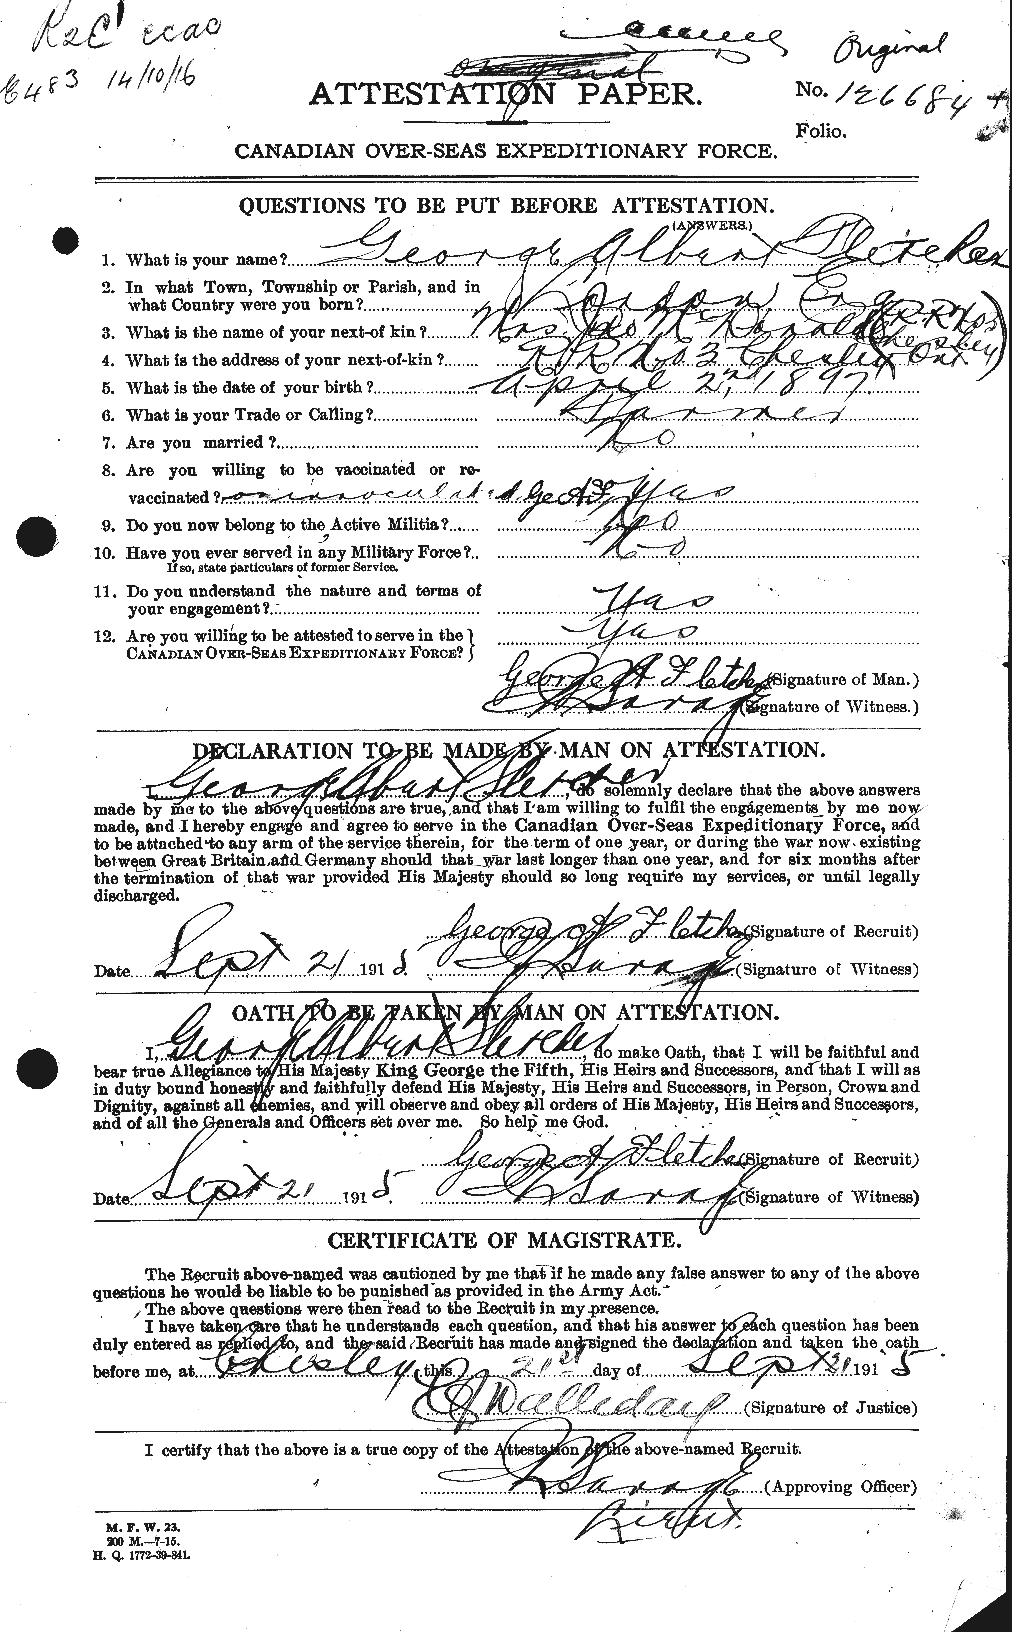 Personnel Records of the First World War - CEF 328315a